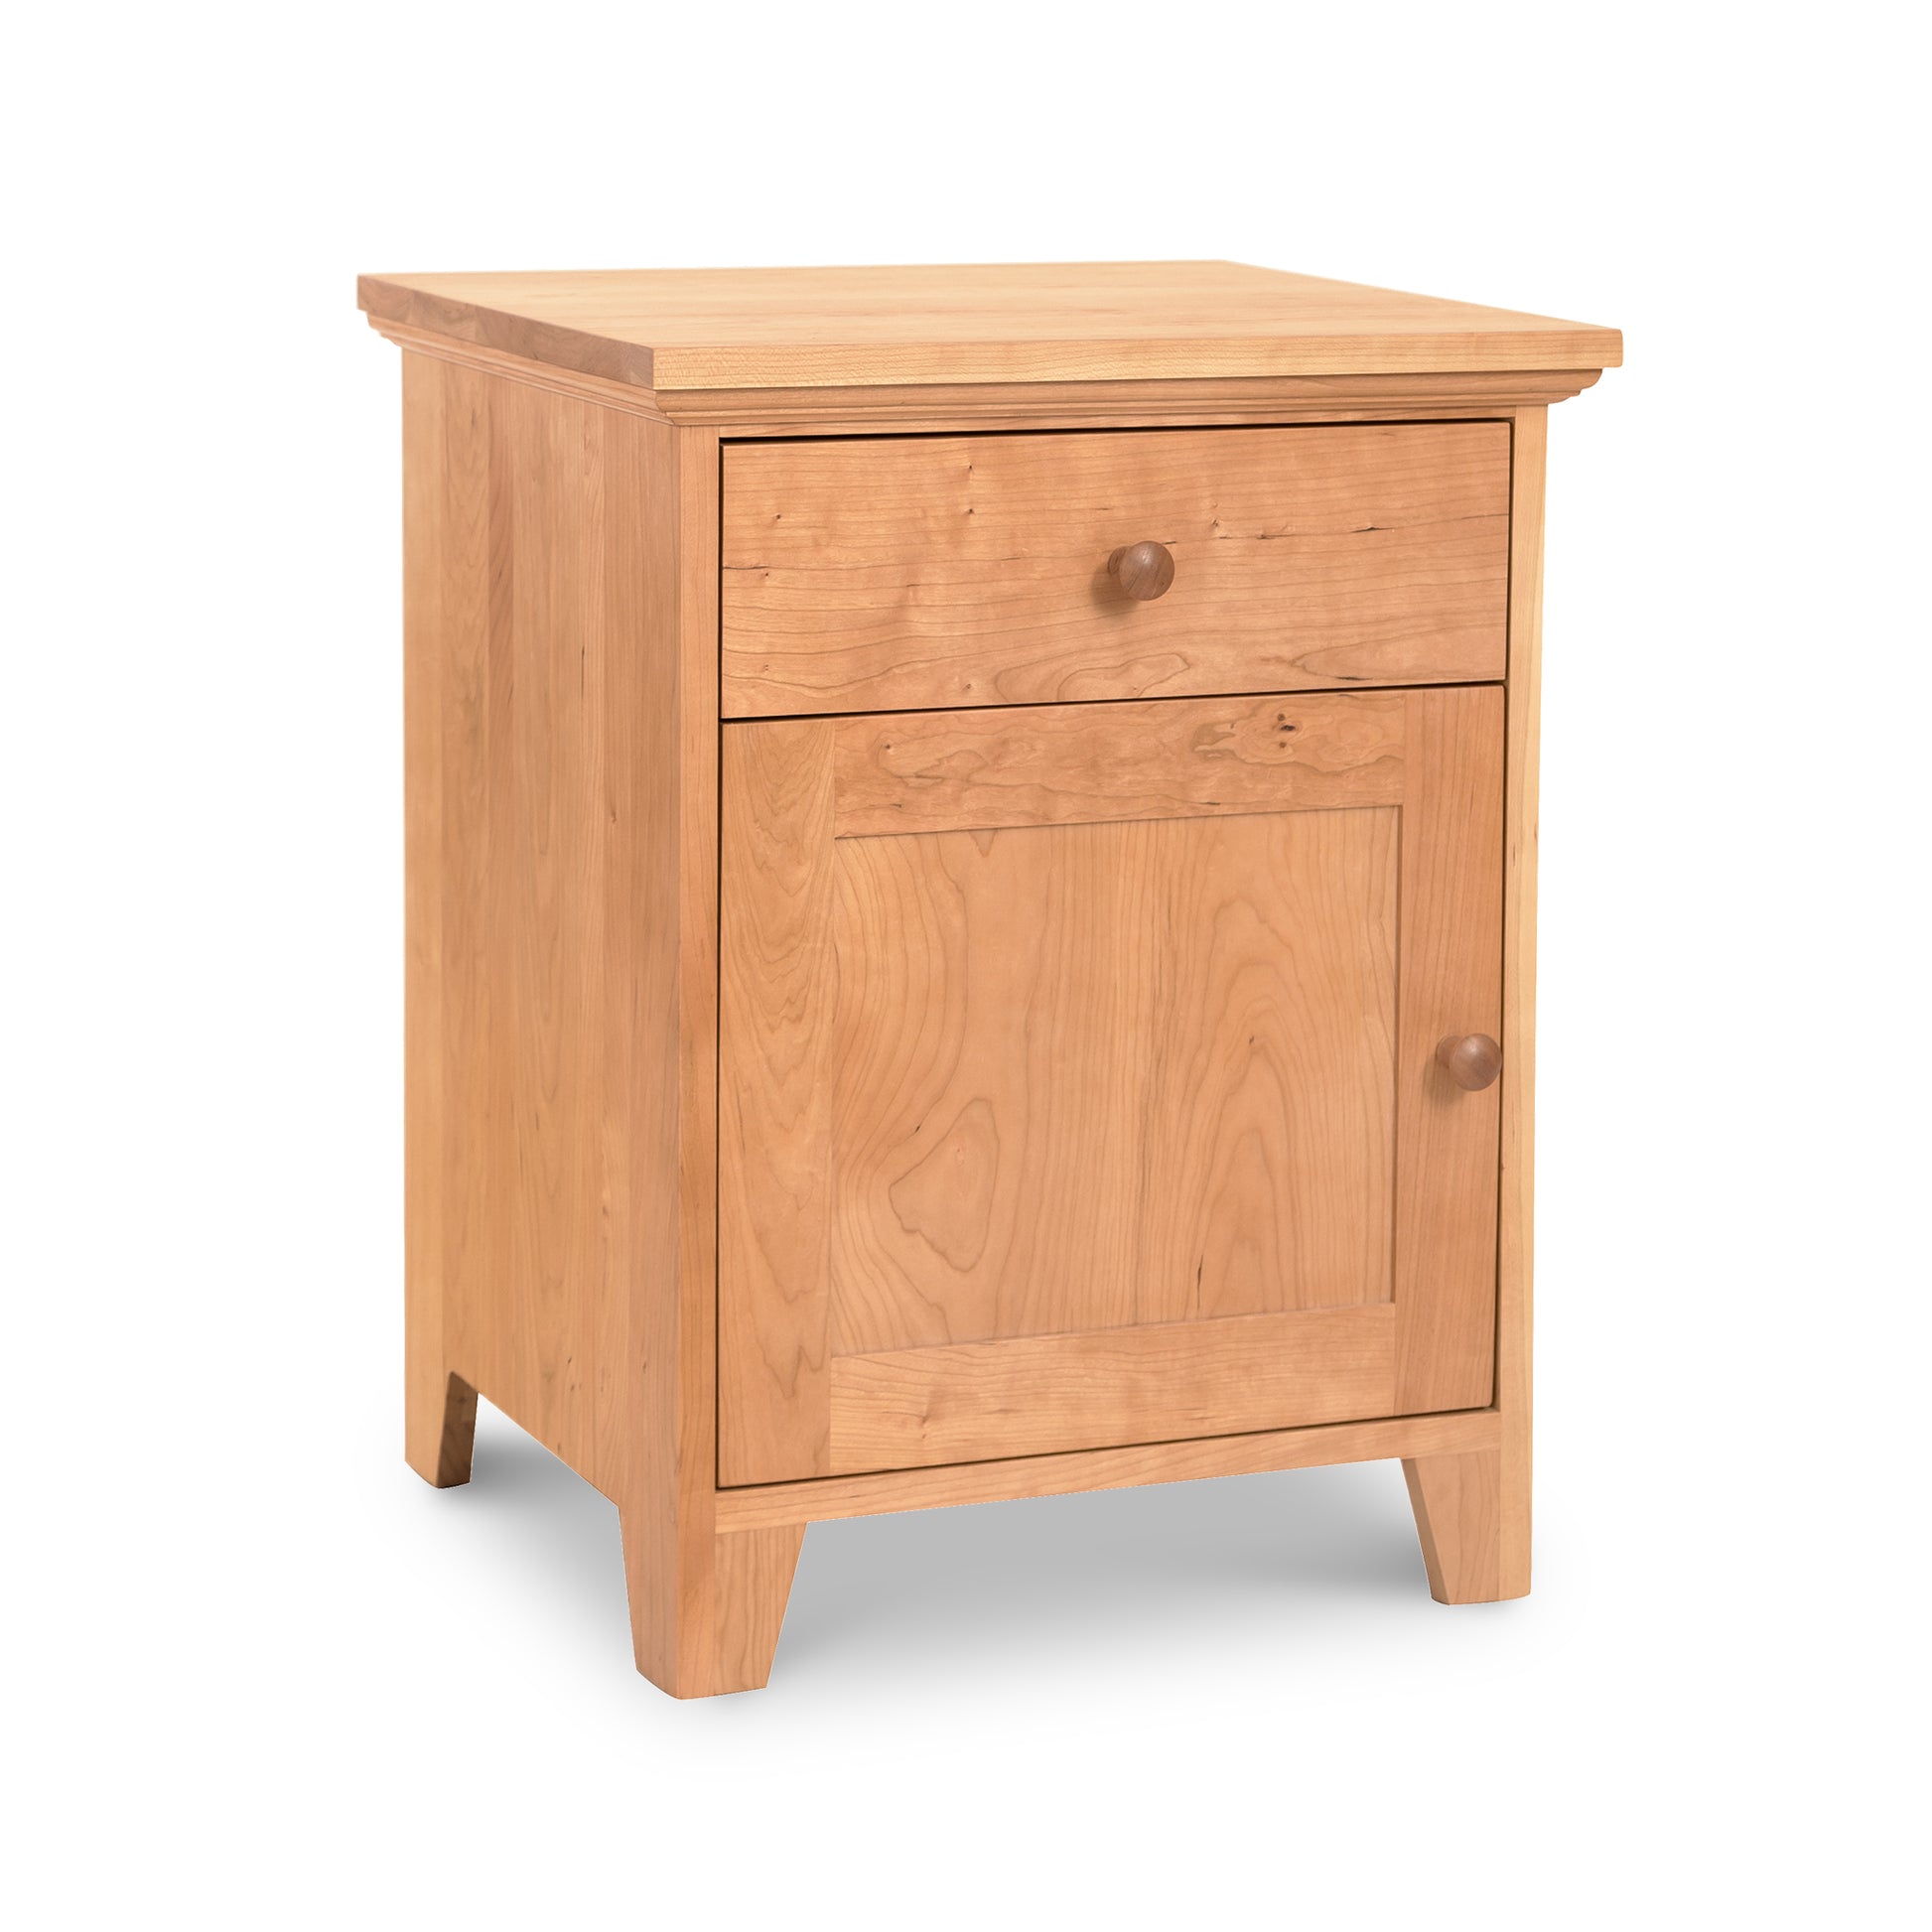 An American Country 1-Drawer Nightstand with Door crafted from solid wood, capturing the essence of Lyndon Furniture's American countryside charm.